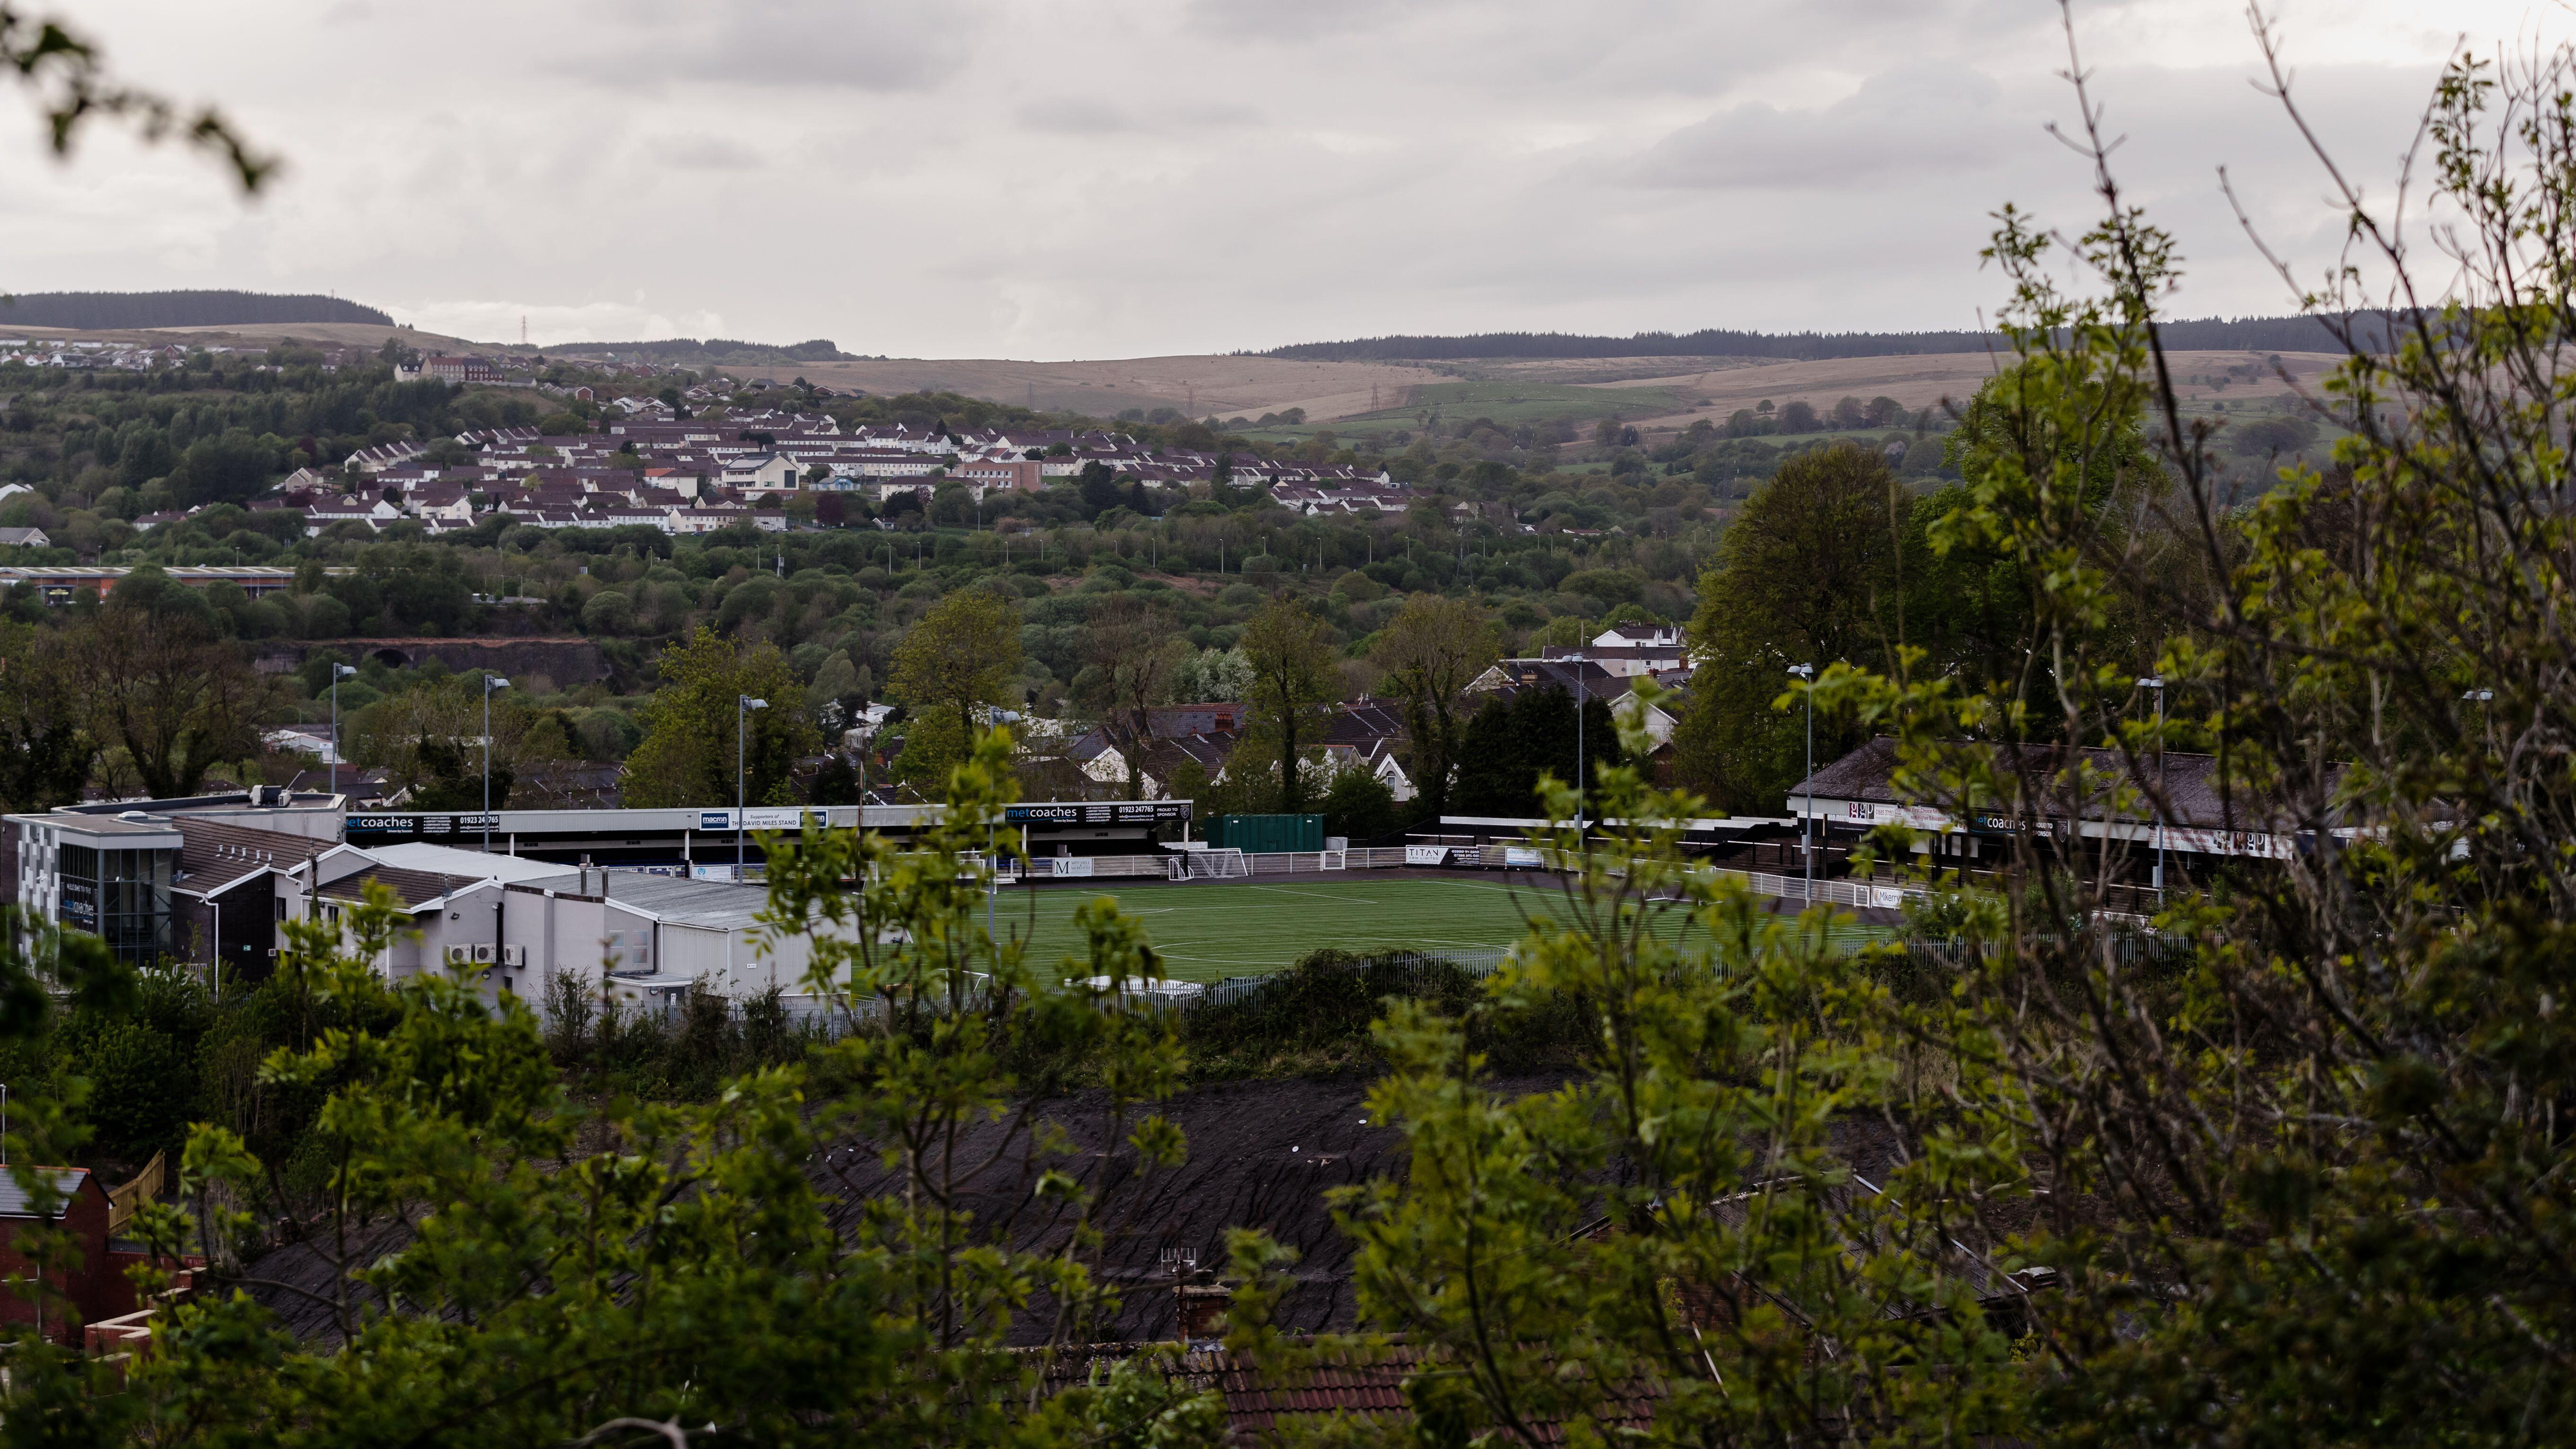 The alleged racist incident against a player happened at Merthyr Town’s home ground, Penydarren Park, on Monday